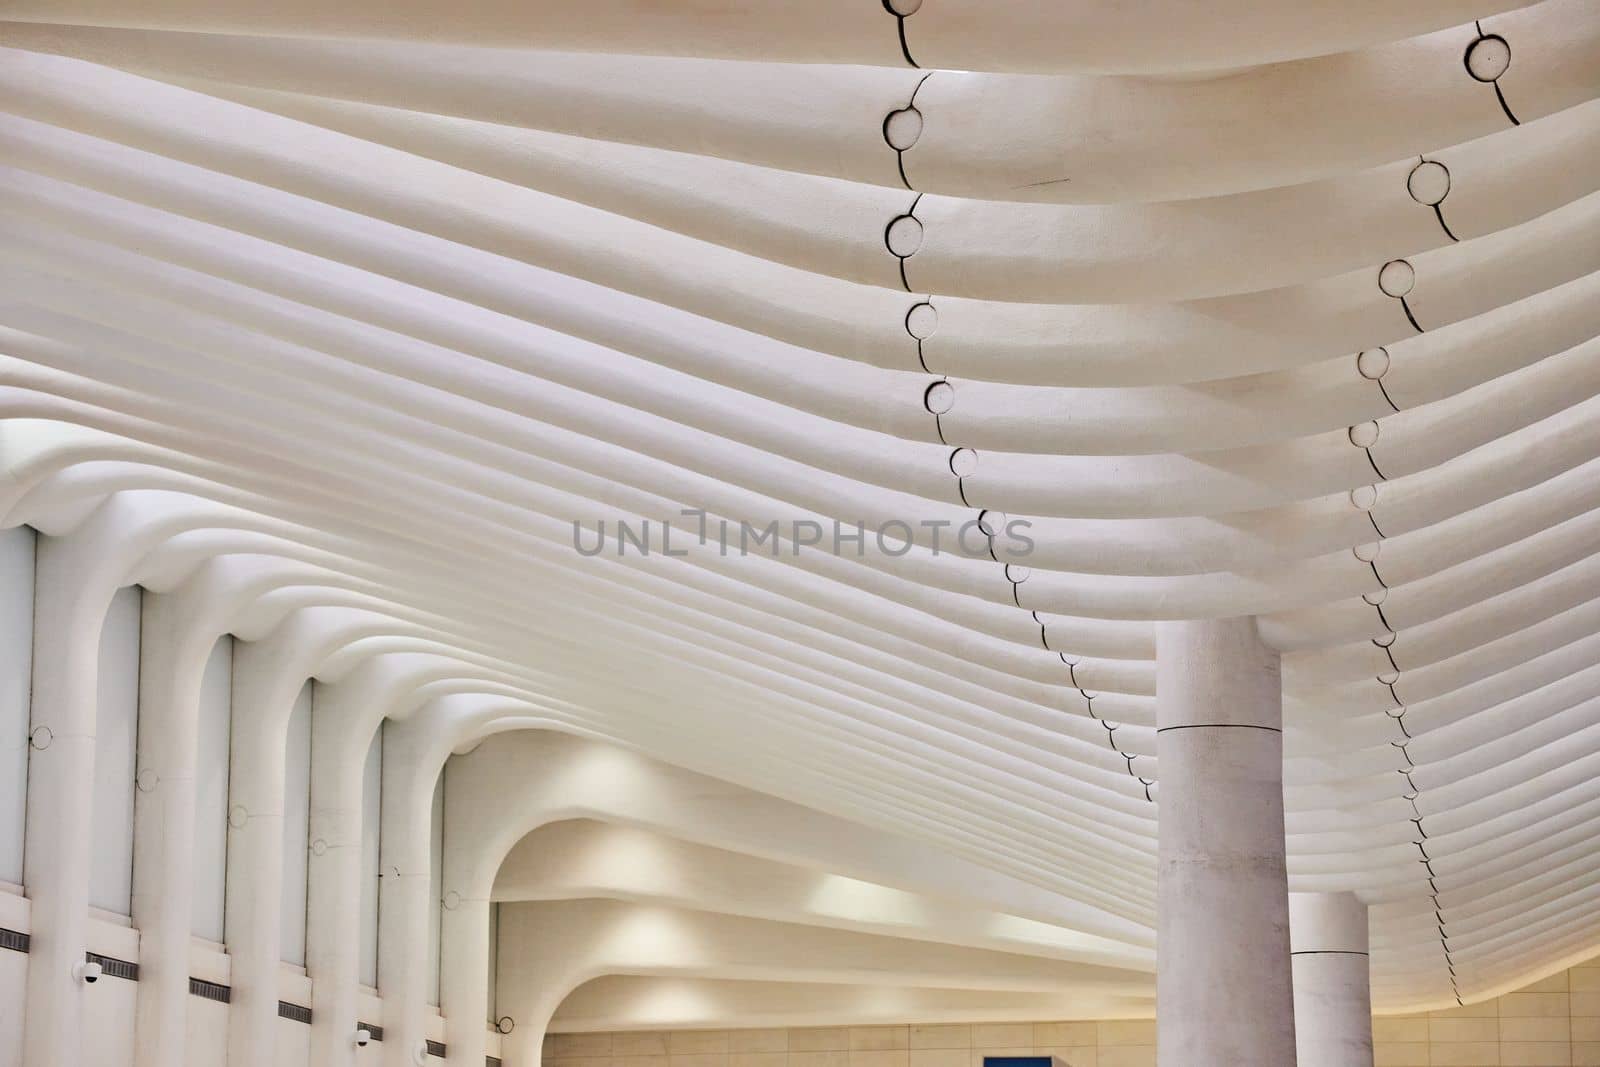 Clean white interior architecture ceiling with pillars and white ribs by njproductions